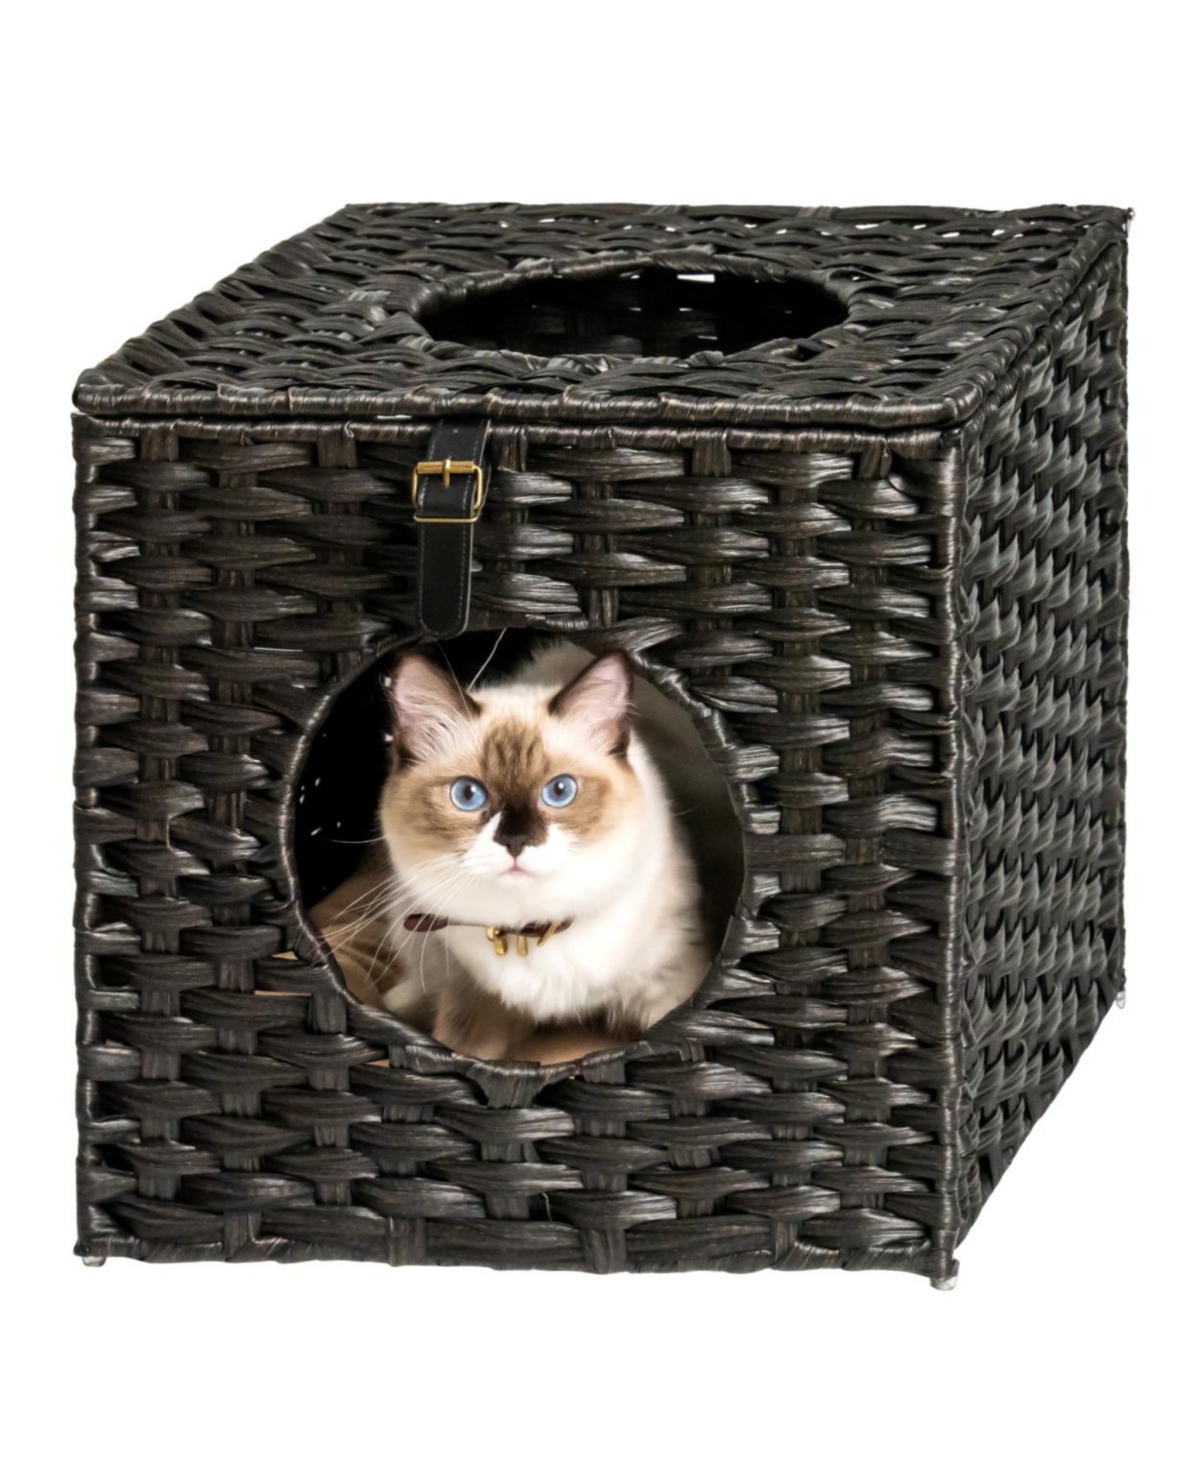 Rattan Cat Litter, Cat Bed With Rattan Ball And Cushion - Black